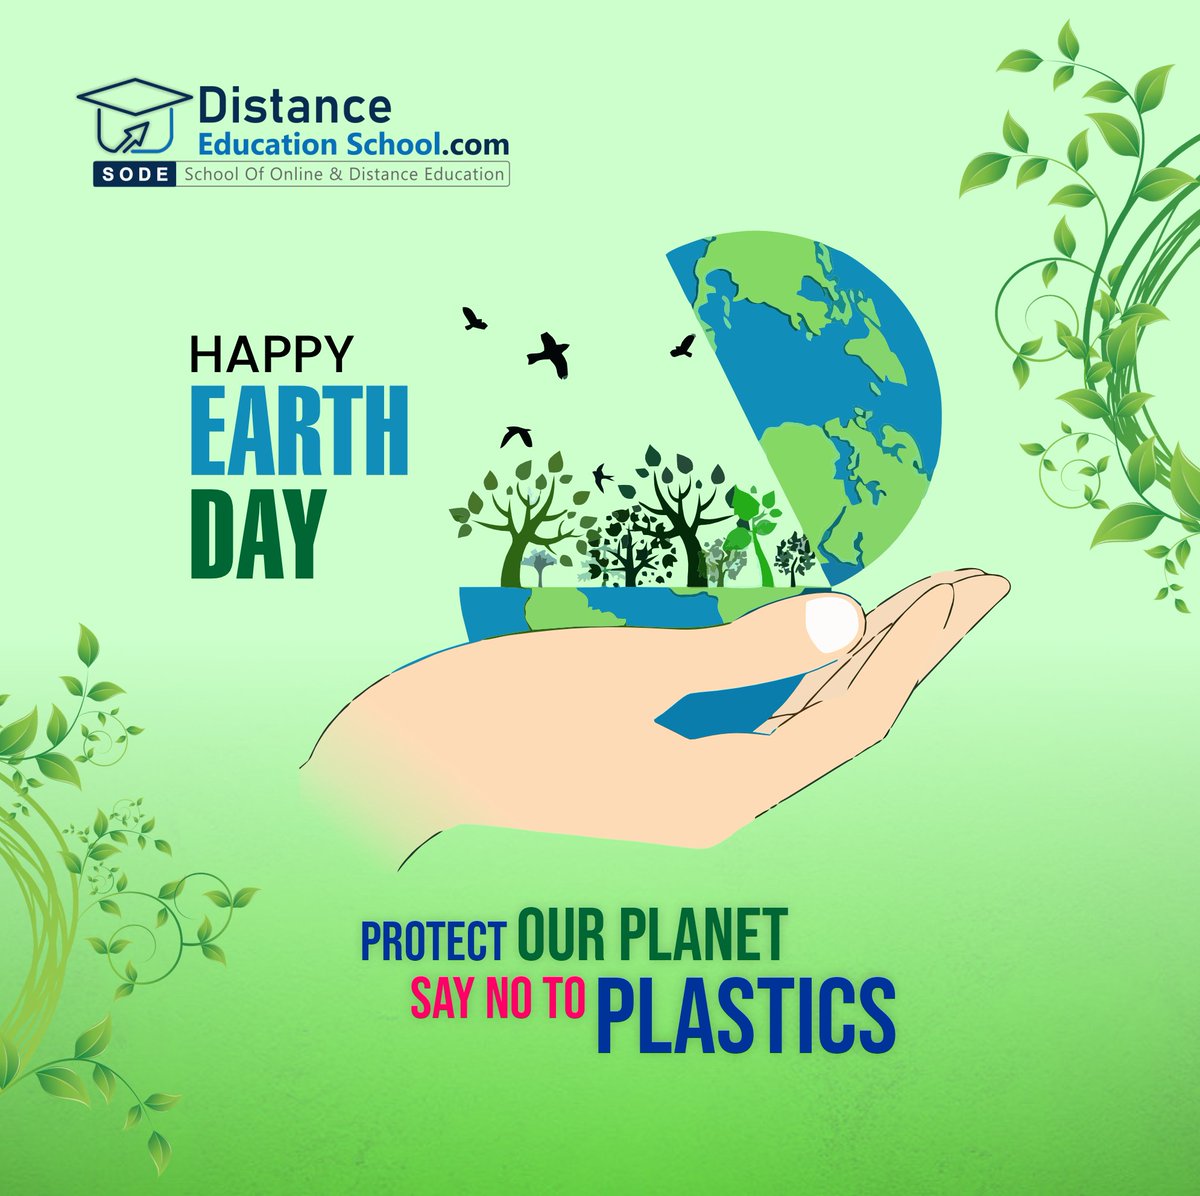 Choose planet-friendly actions today for a greener, plastic-free tomorrow. Join the movement to preserve our planet for generations to come. . #Happyearthday #earthday #earth #nature #earthdayeveryday #motherearth #savetheplanet #ecofriendly #worldearthday #education